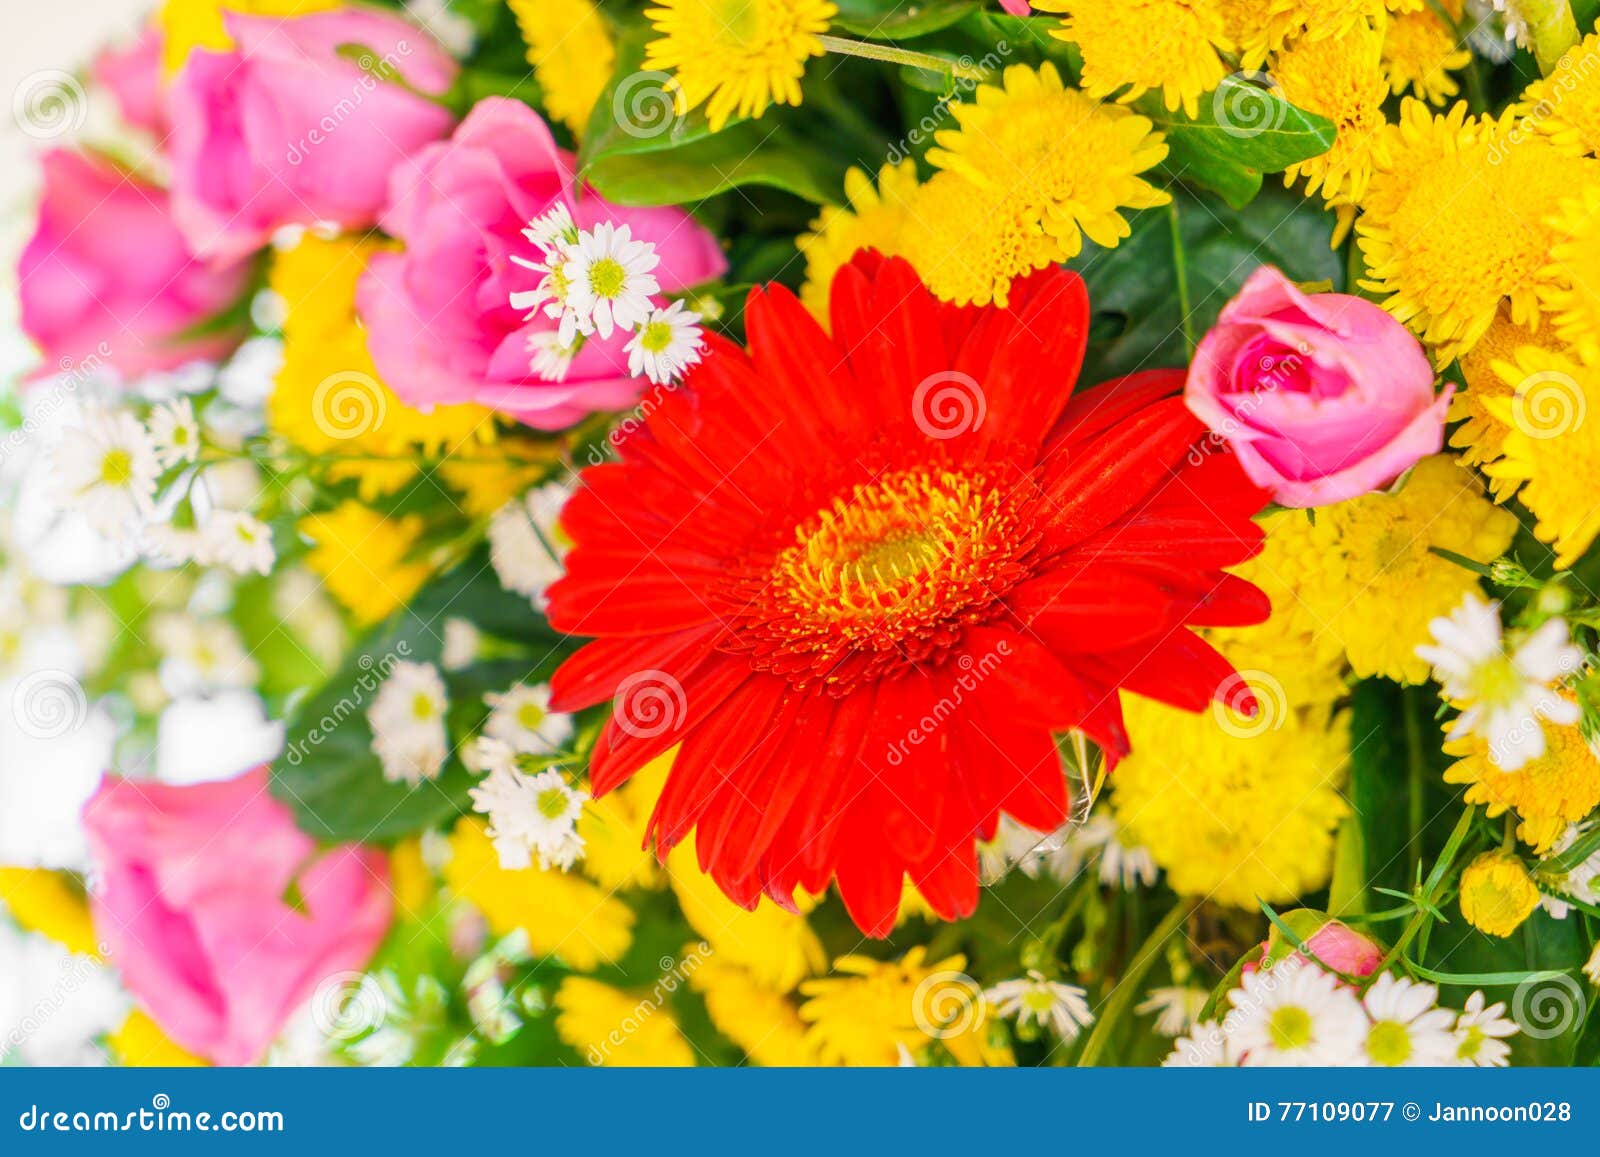 .Beautiful Flowers for Valentines and Wedding Scene Stock Image - Image ...